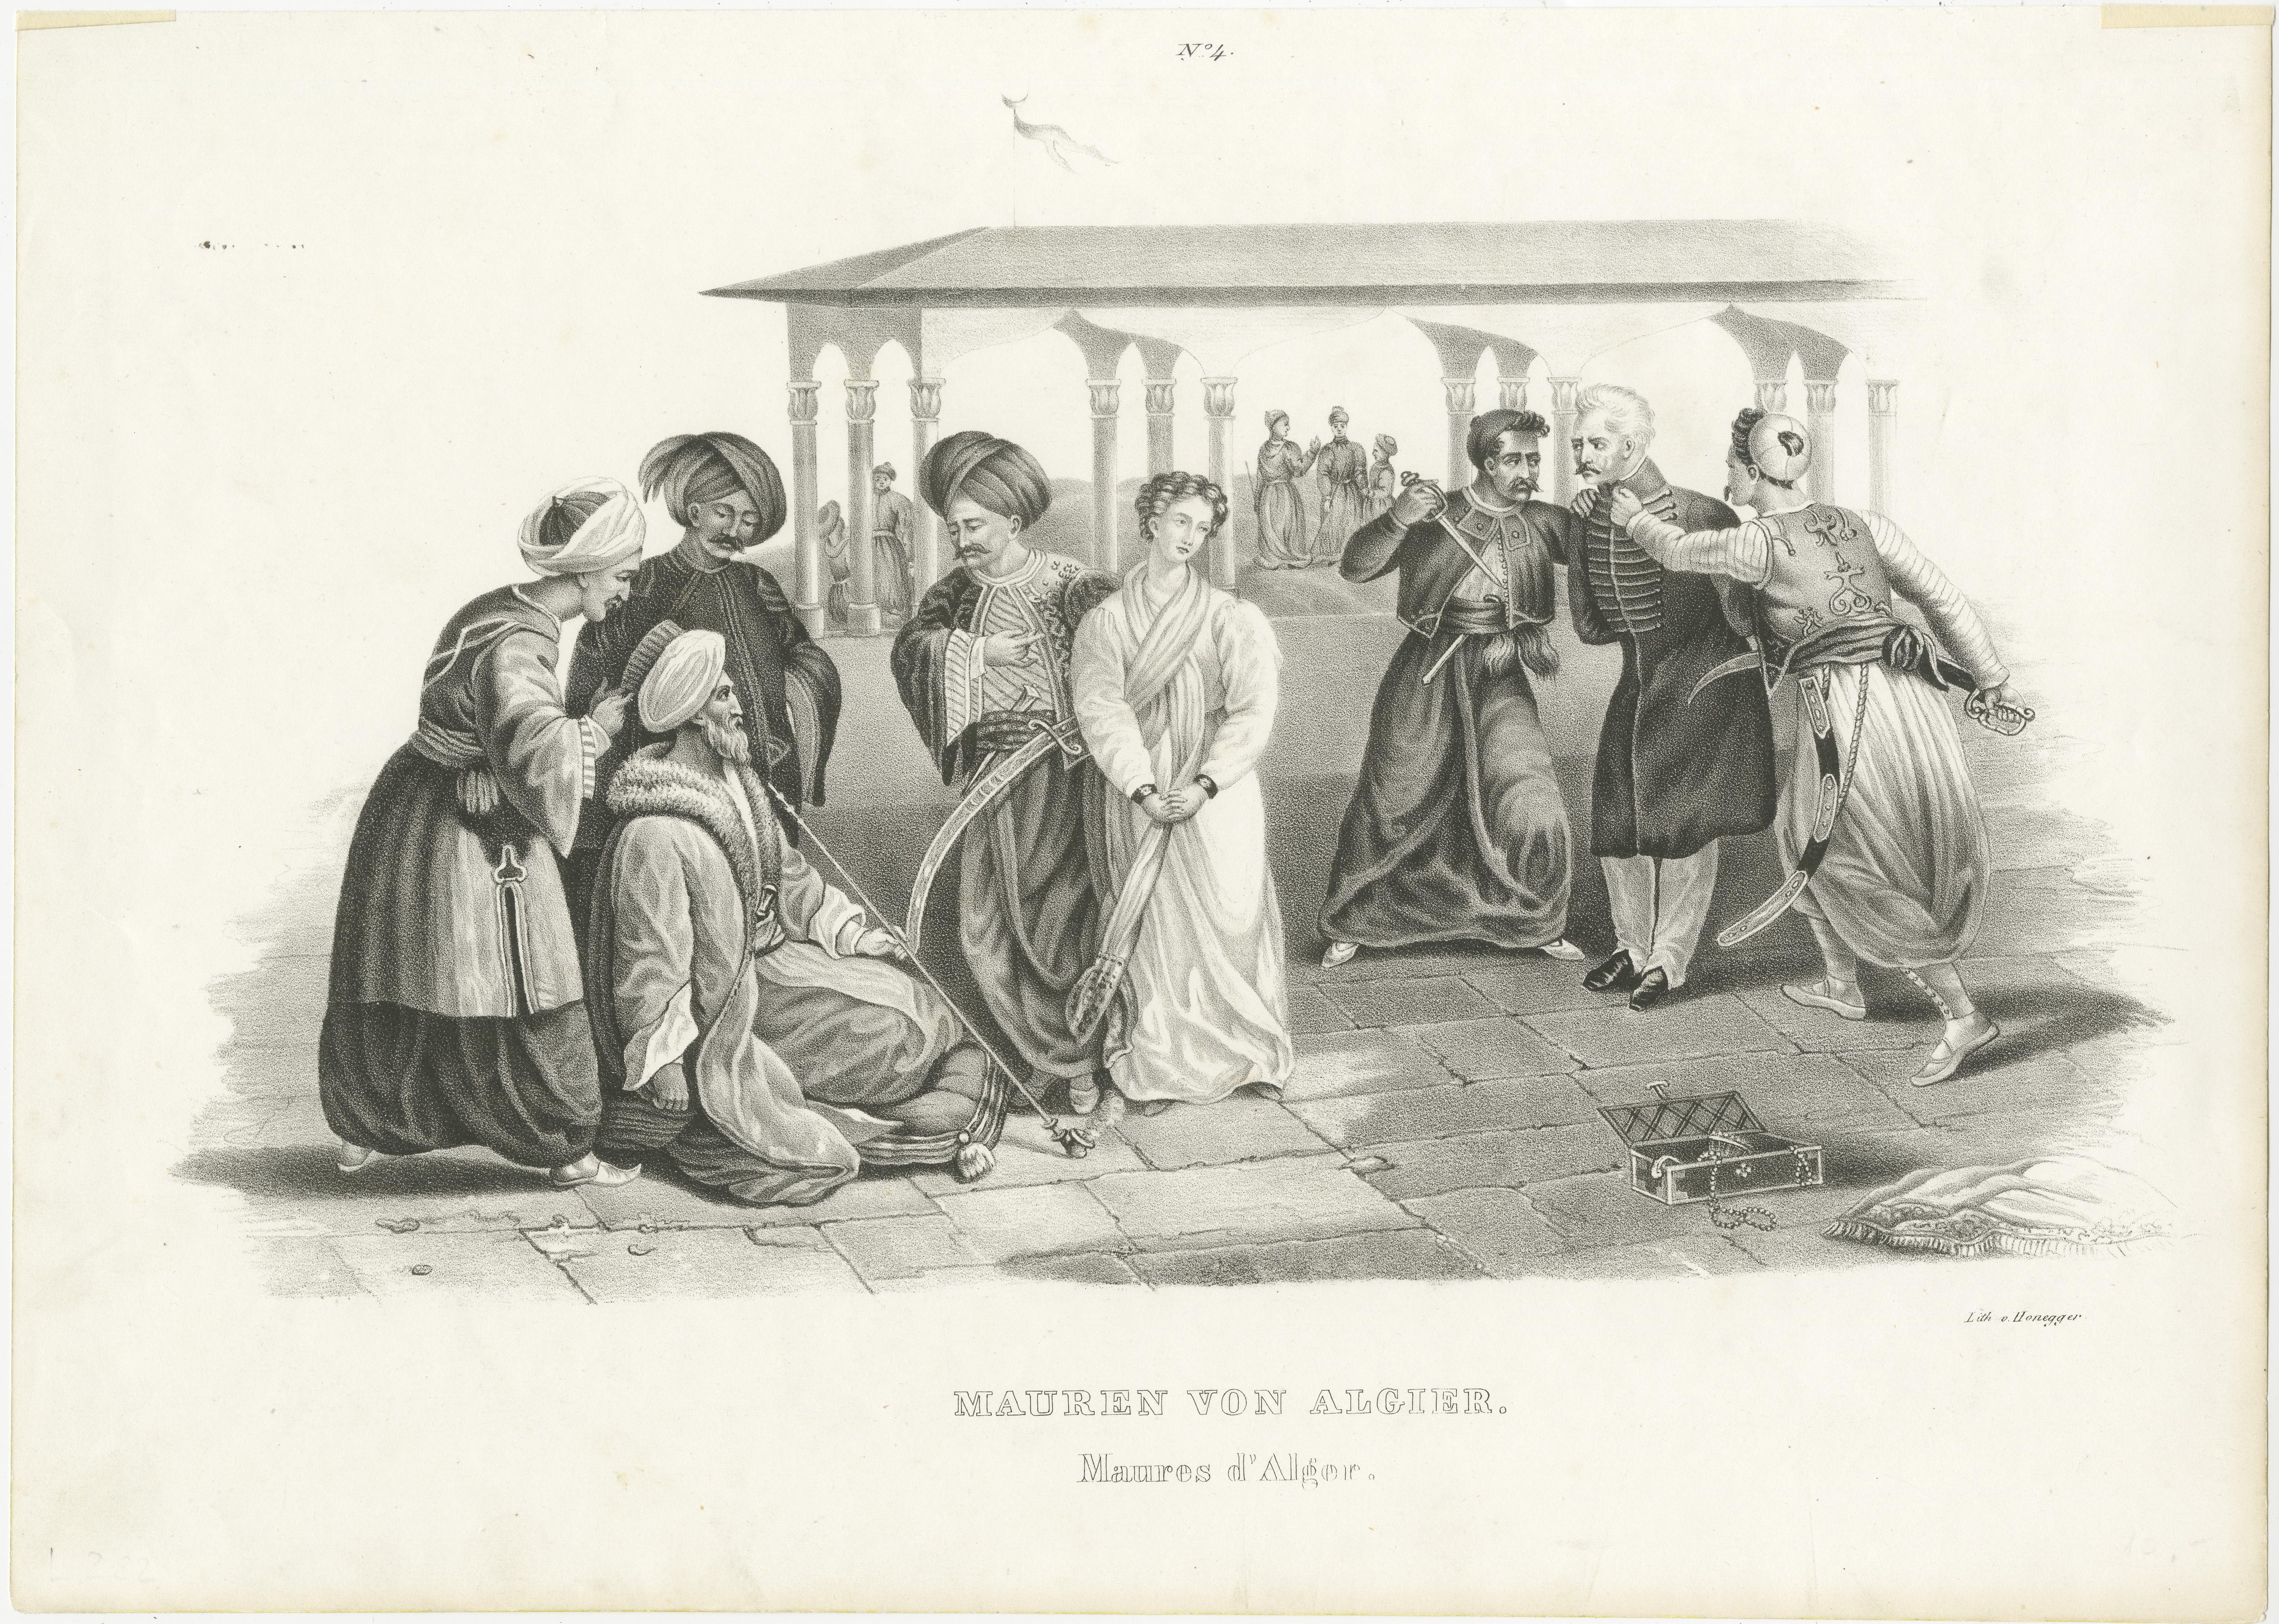 Antique print titled 'Mauren von Algier. Maures d'Alger'. Original antique steel engraving showing Moors from Algiers, Algeria. Lithographed by Honegger. Published circa 1845. Source unknown, to be determined.